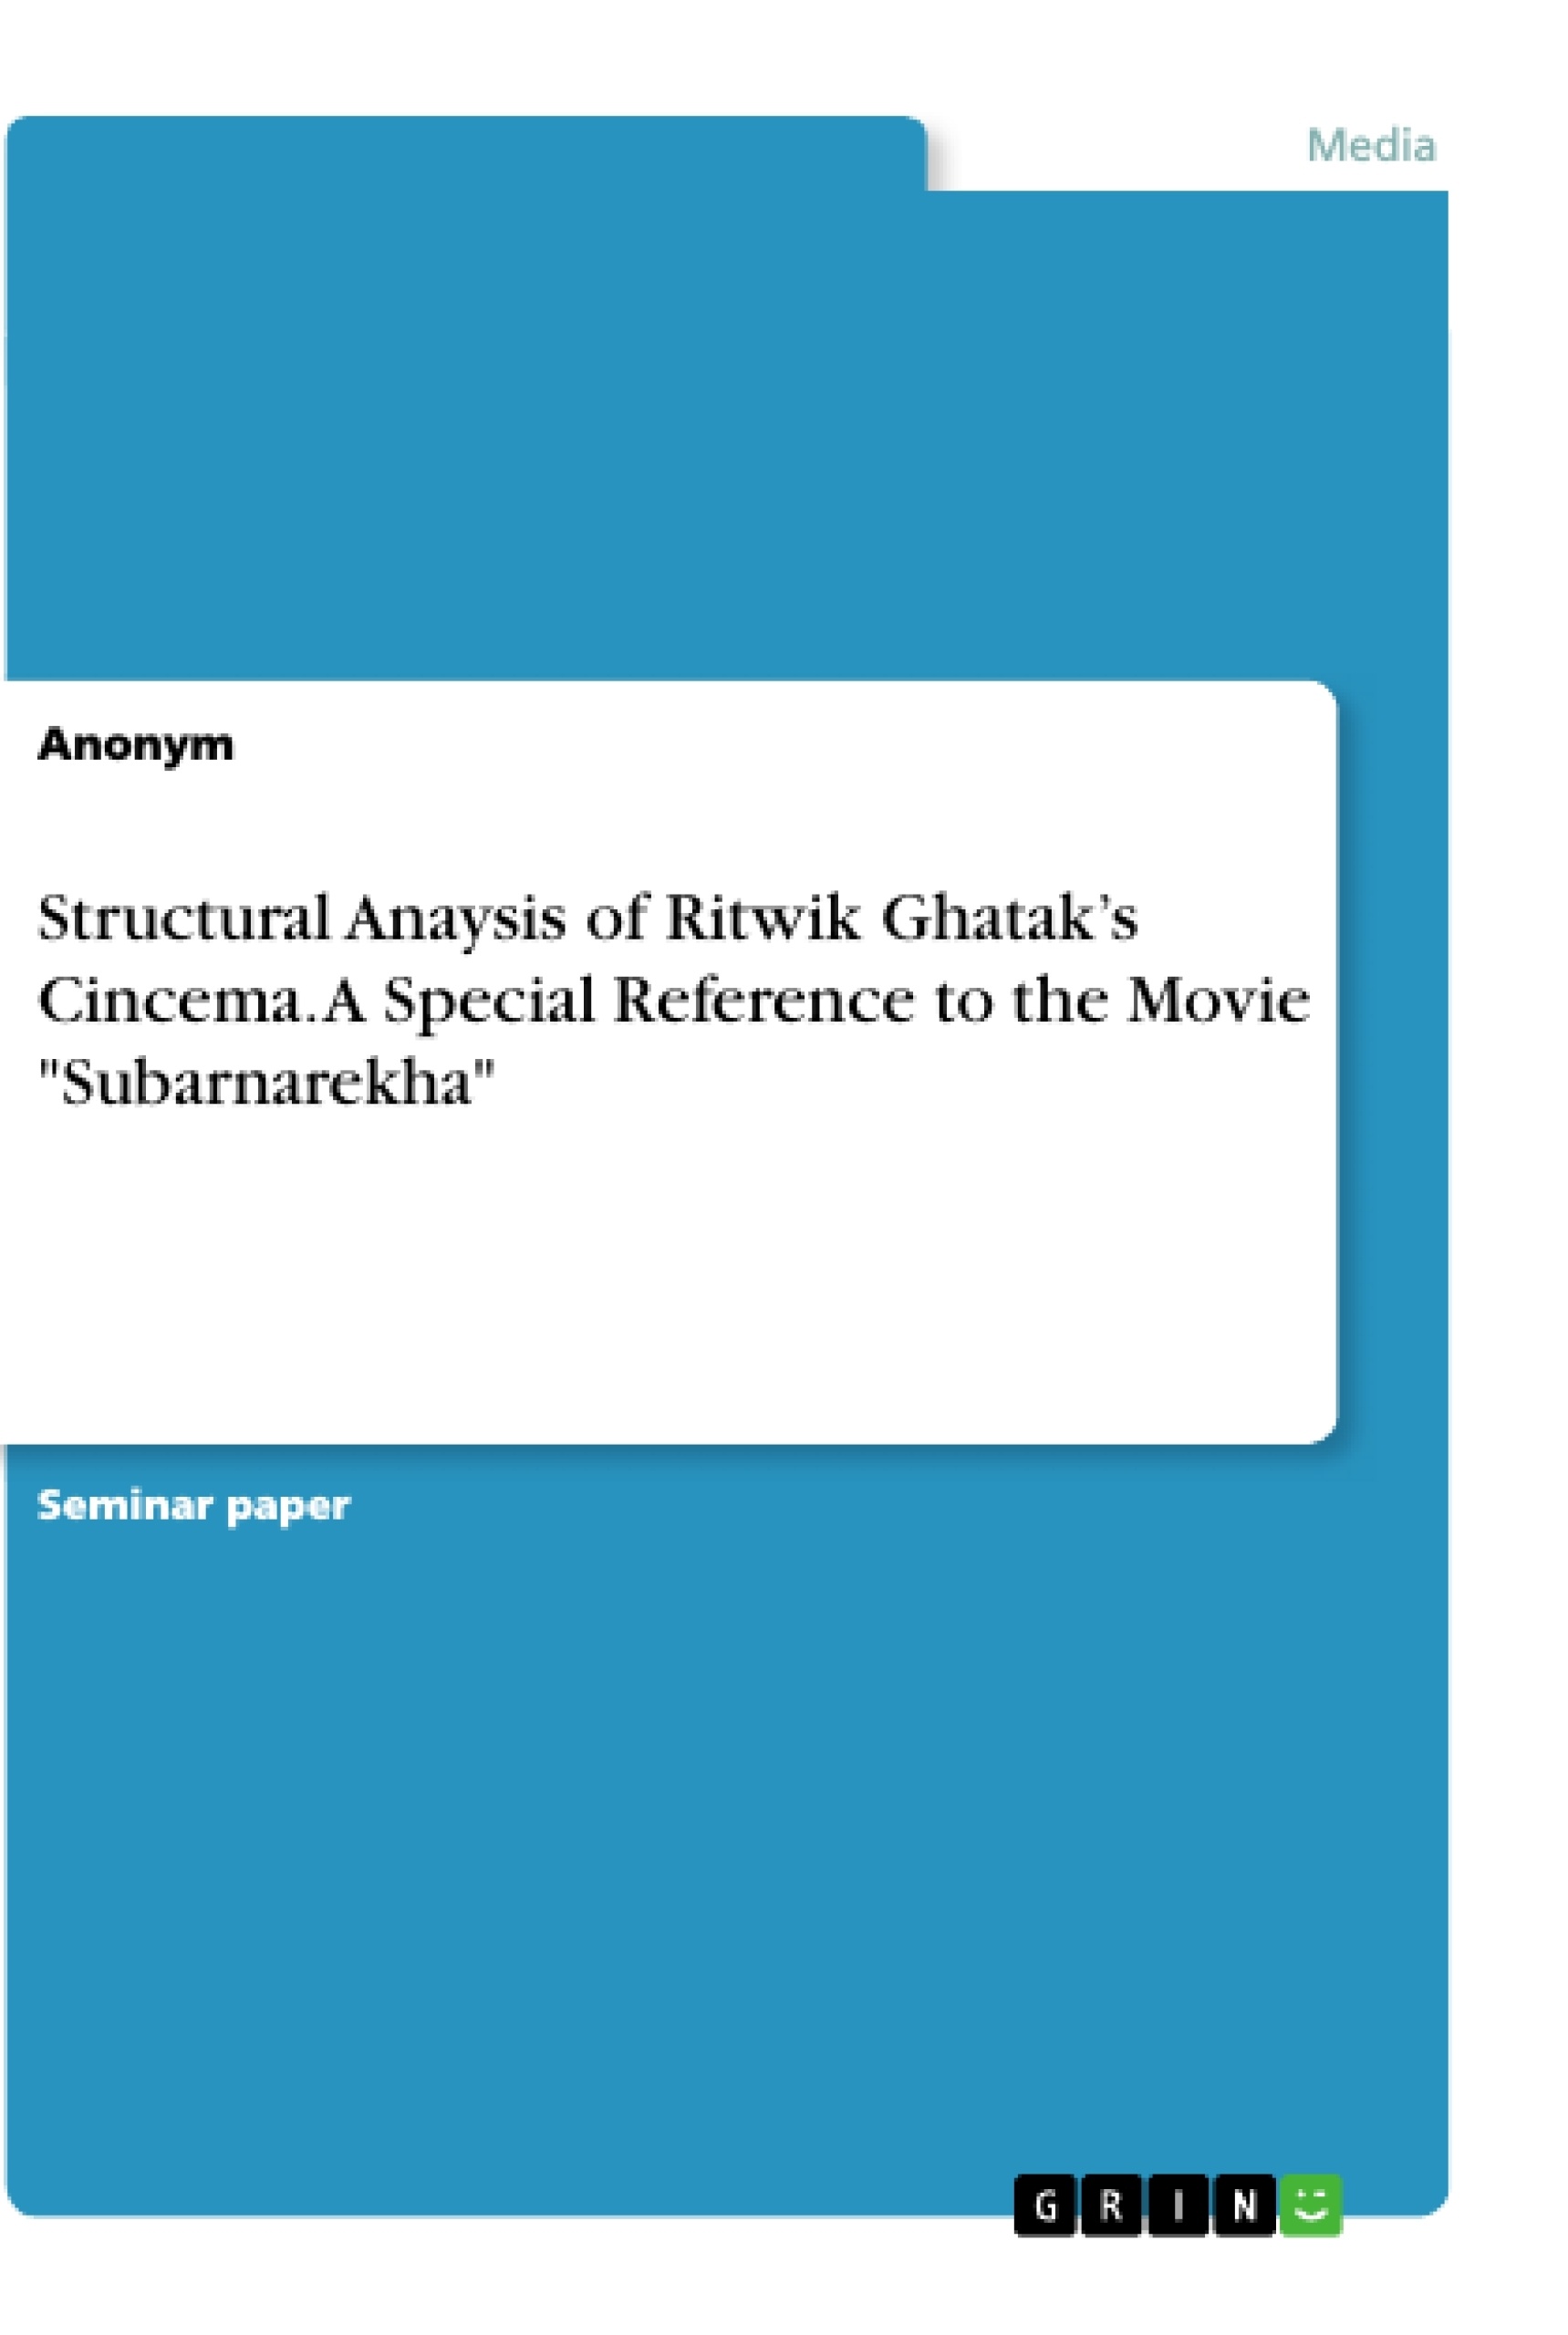 Titre: Structural Anaysis of  Ritwik Ghatak’s Cincema. A  Special Reference to the Movie "Subarnarekha"